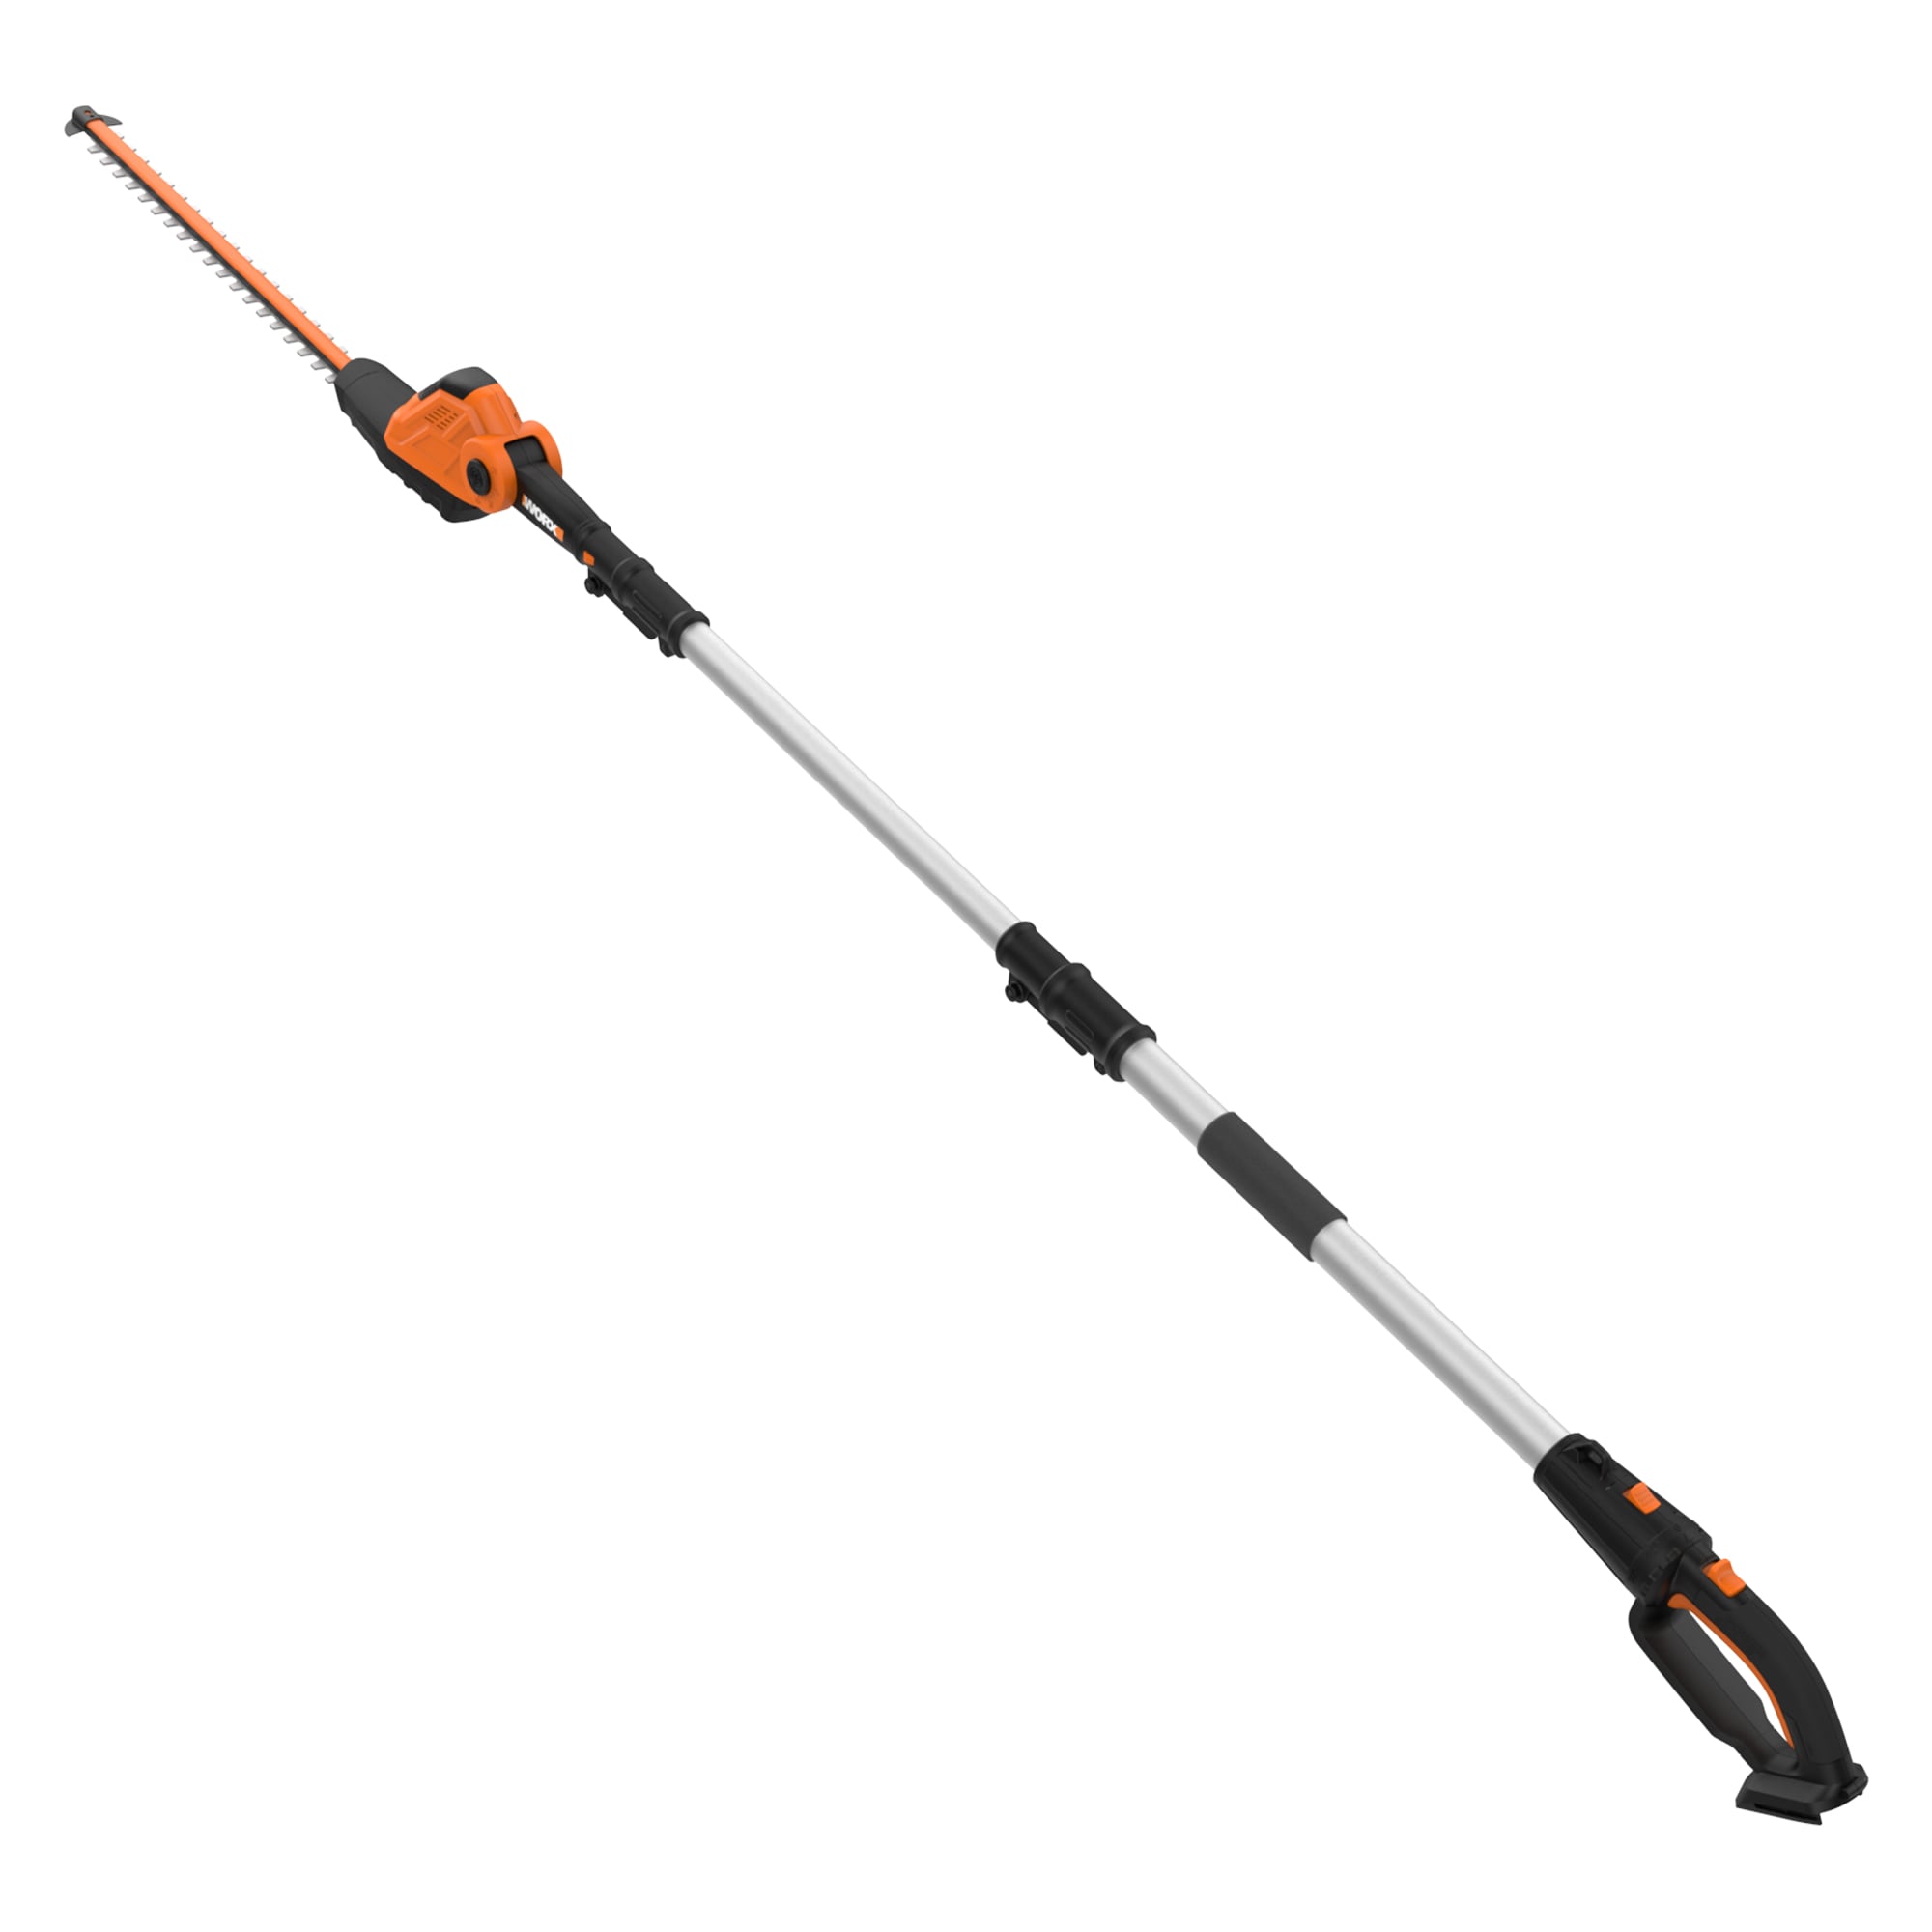 20V MAX* Cordless Pole Saw and Pole Hedge Trimmer Combo Kit